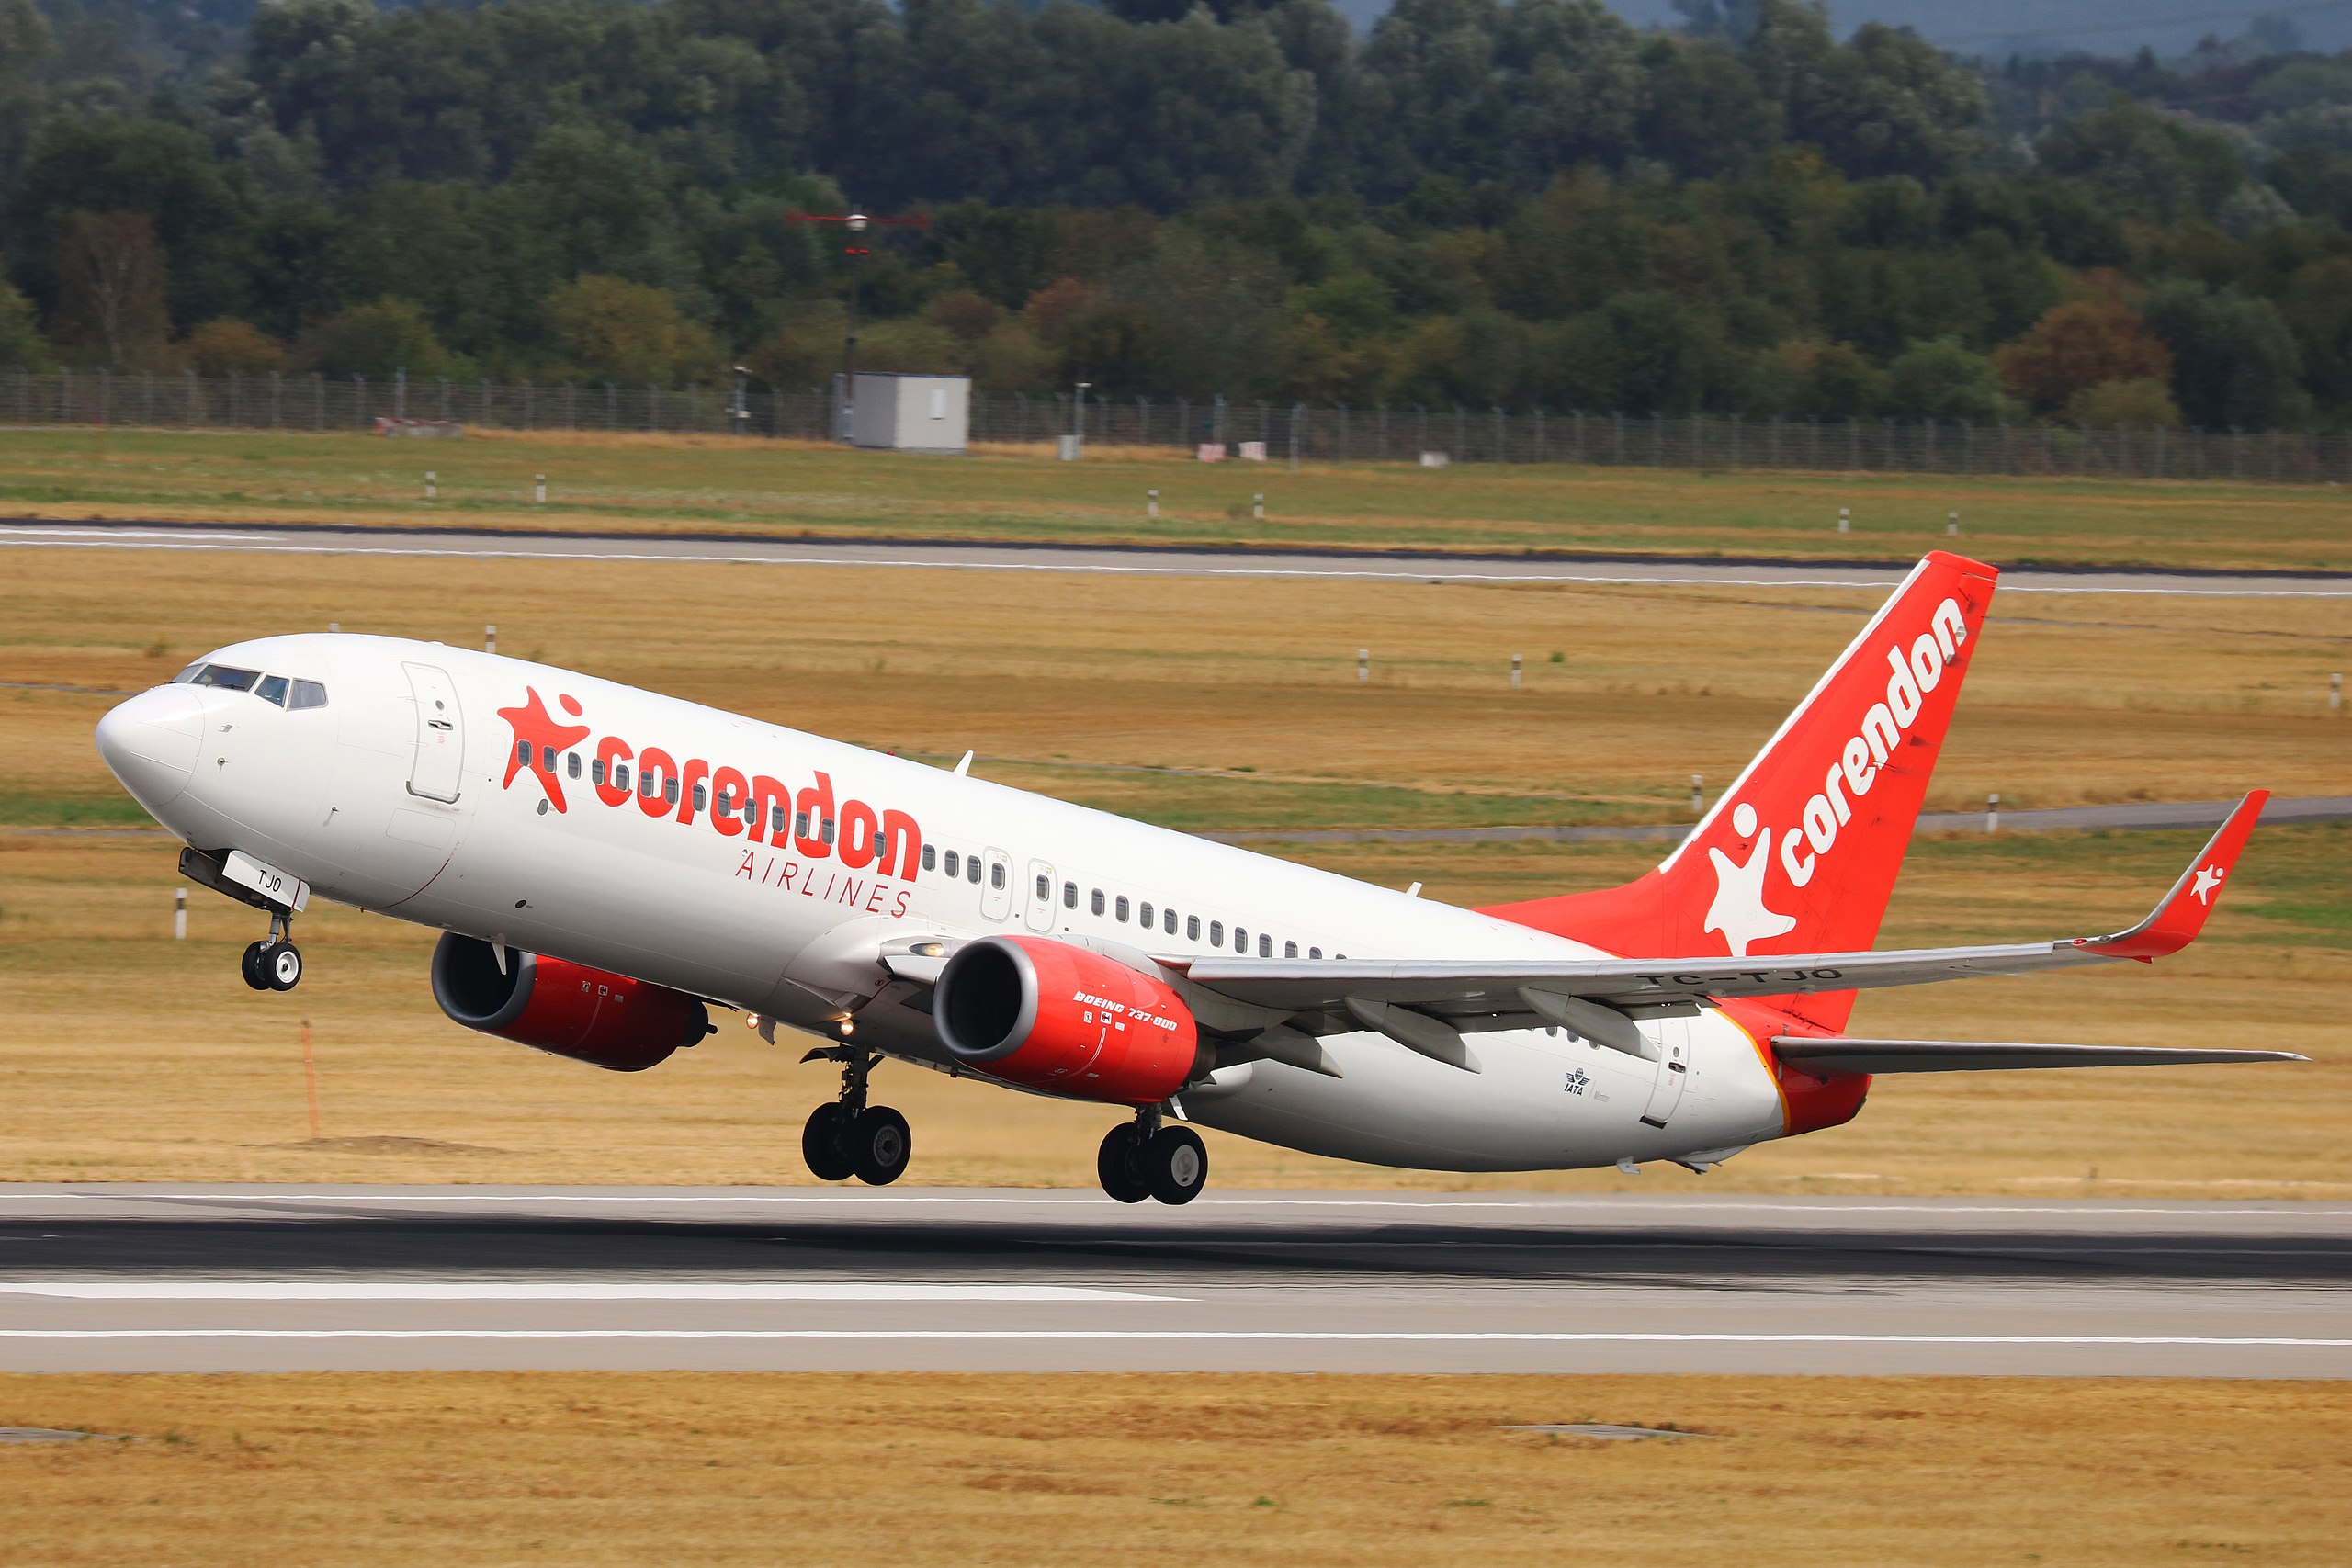 A Corendon Airlines Boeing 737 takes off.